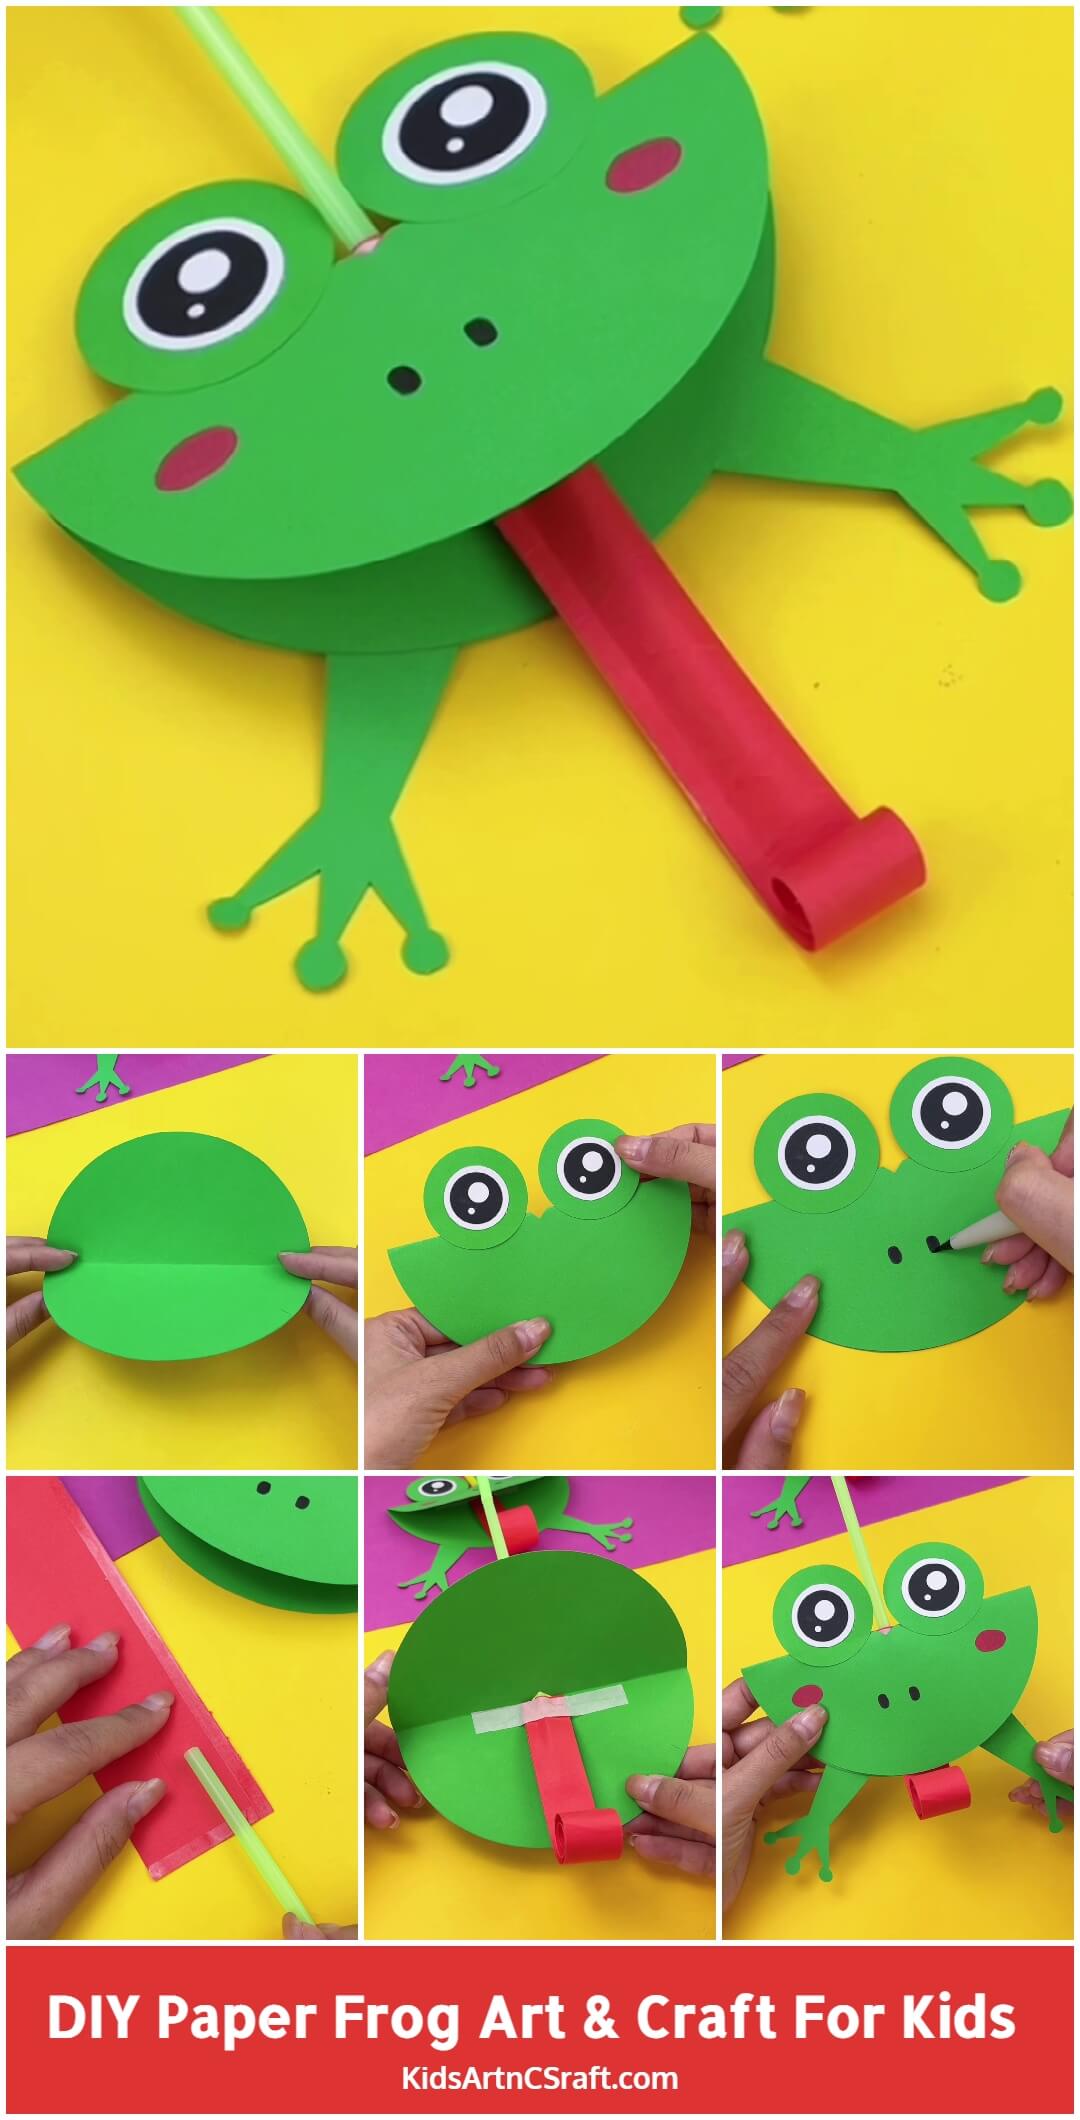 DIY How to Make Paper Frog Art and Craft for Kids-Step by Step Tutorial